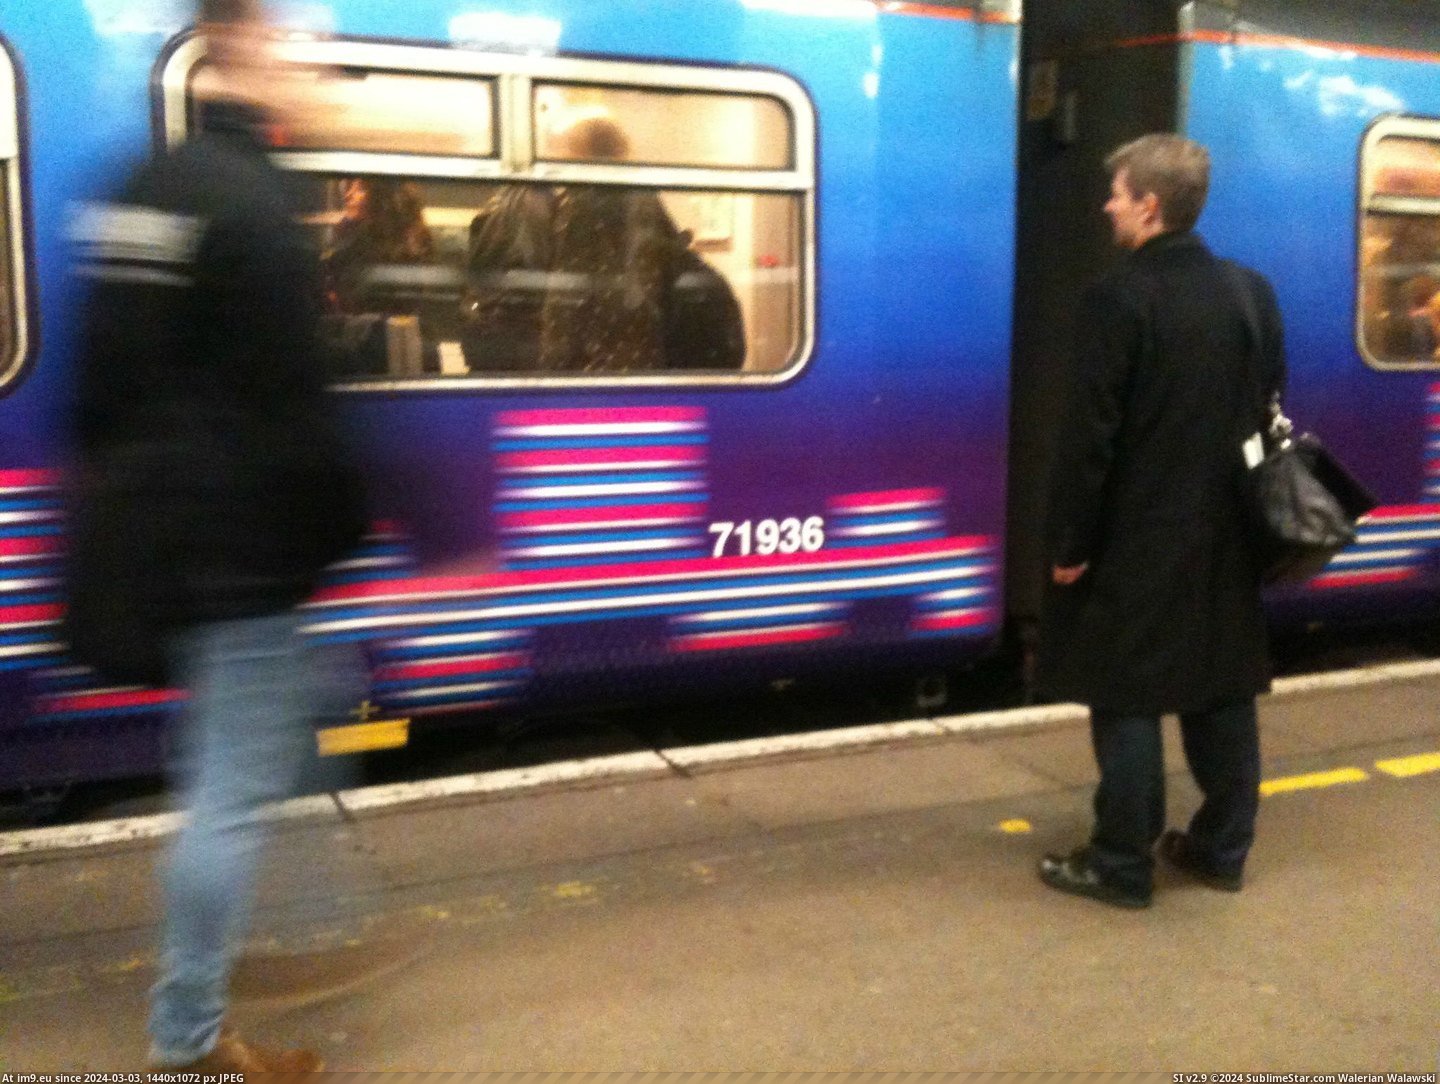 #Moving #Train #Blurry #Stopped #Graphics [Mildlyinteresting] The blurry graphics on this train make it look like it's moving when the train is stopped. Pic. (Bild von album My r/MILDLYINTERESTING favs))